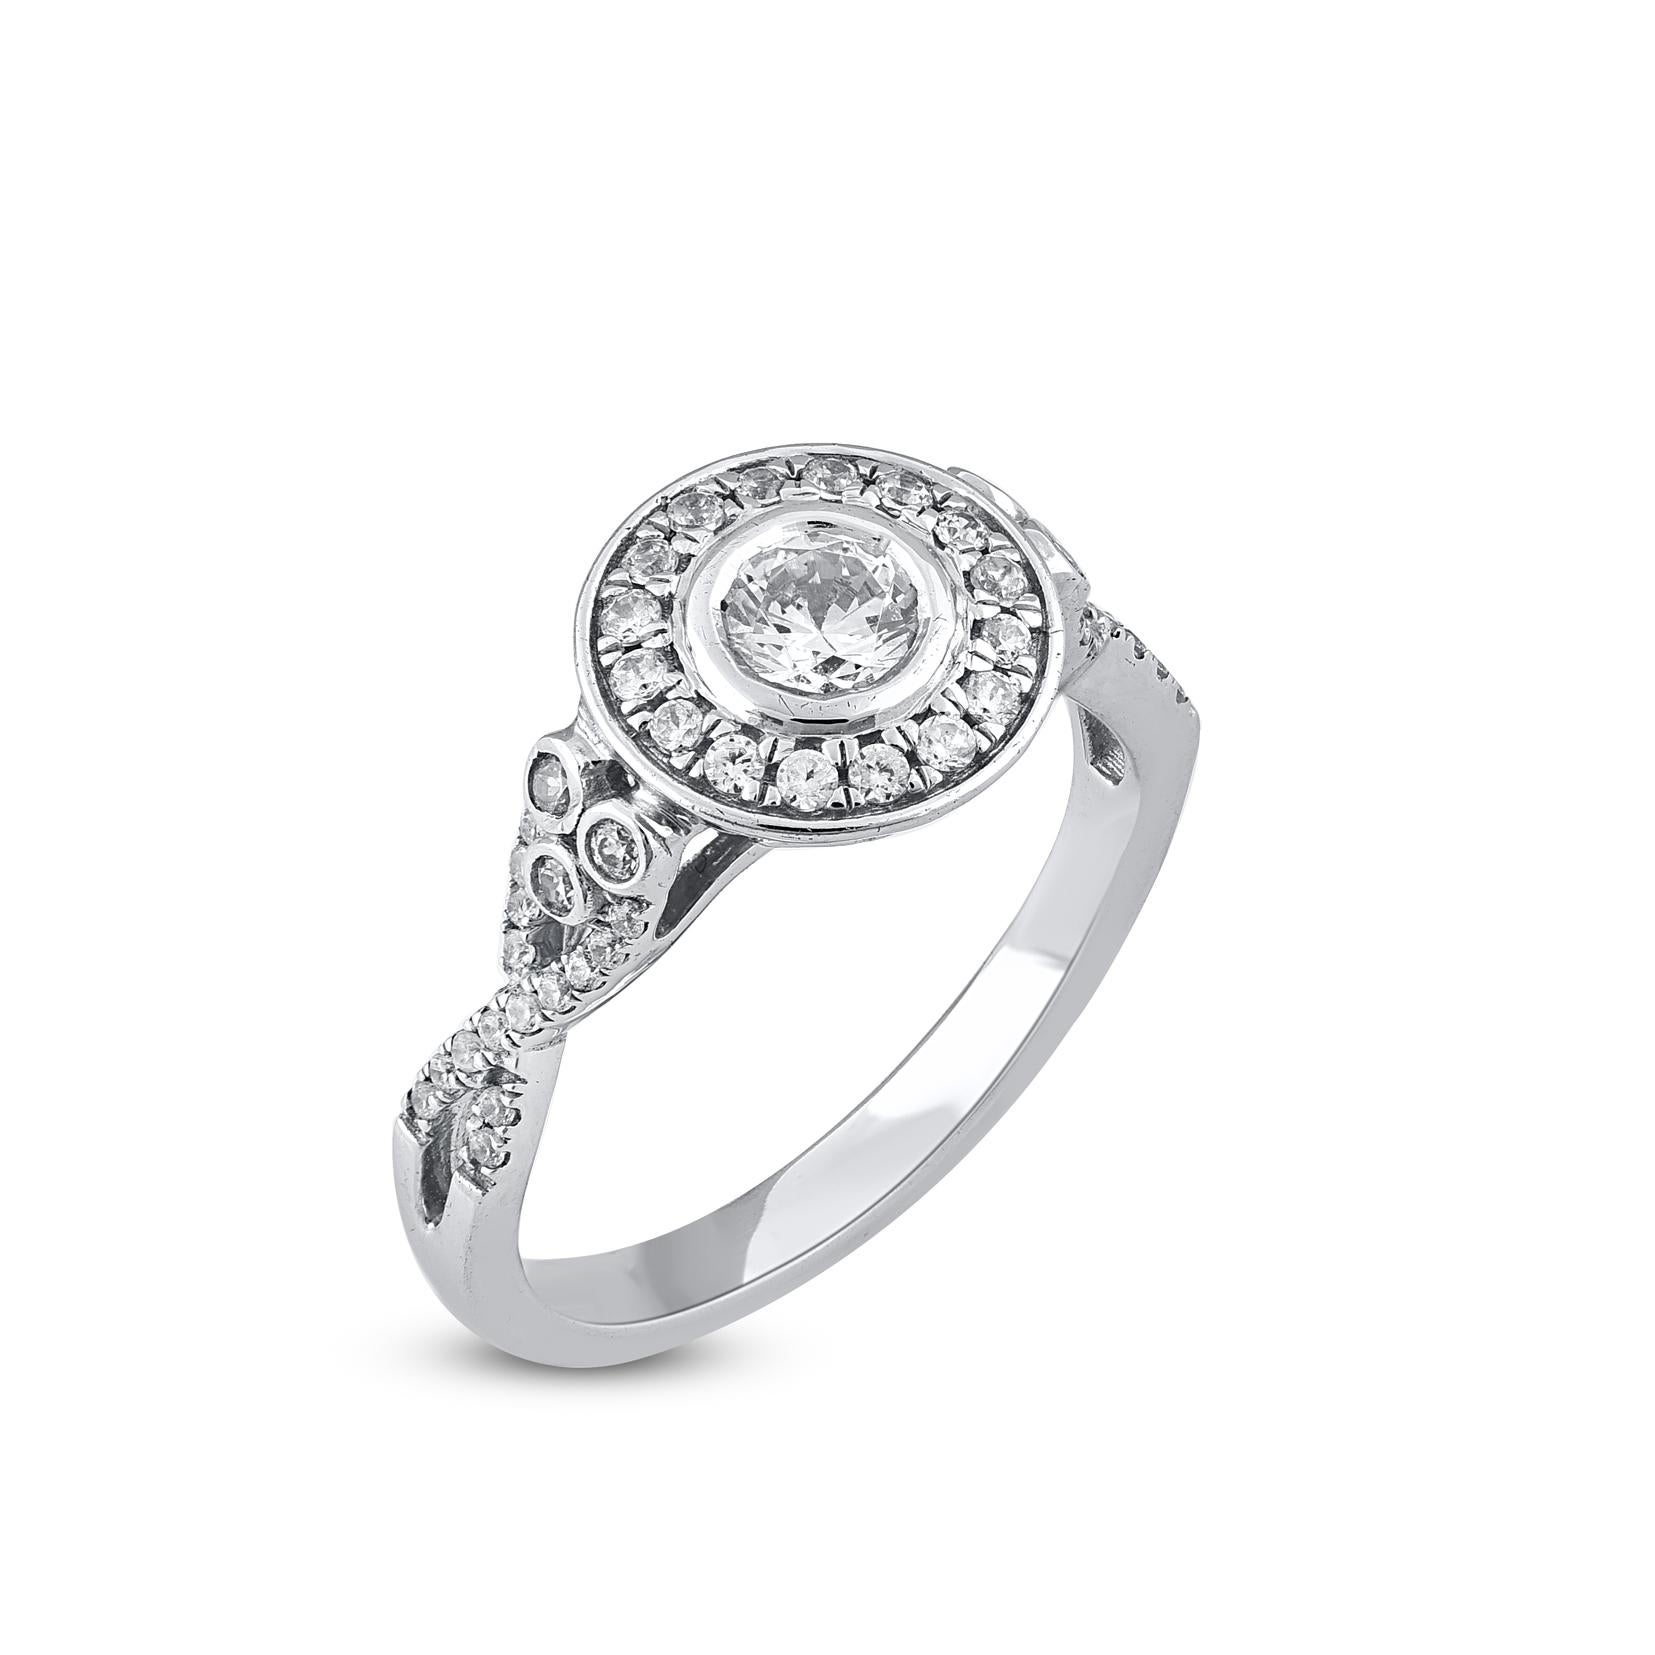 Give a touch of glamour to your fine jewelry collection with this diamond engagement ring. It features 0.45ct of center stone and 0.30 ct of 52 diamond set in frame and shoulders set in bezel and  prong setting. The diamond are natural, not treated